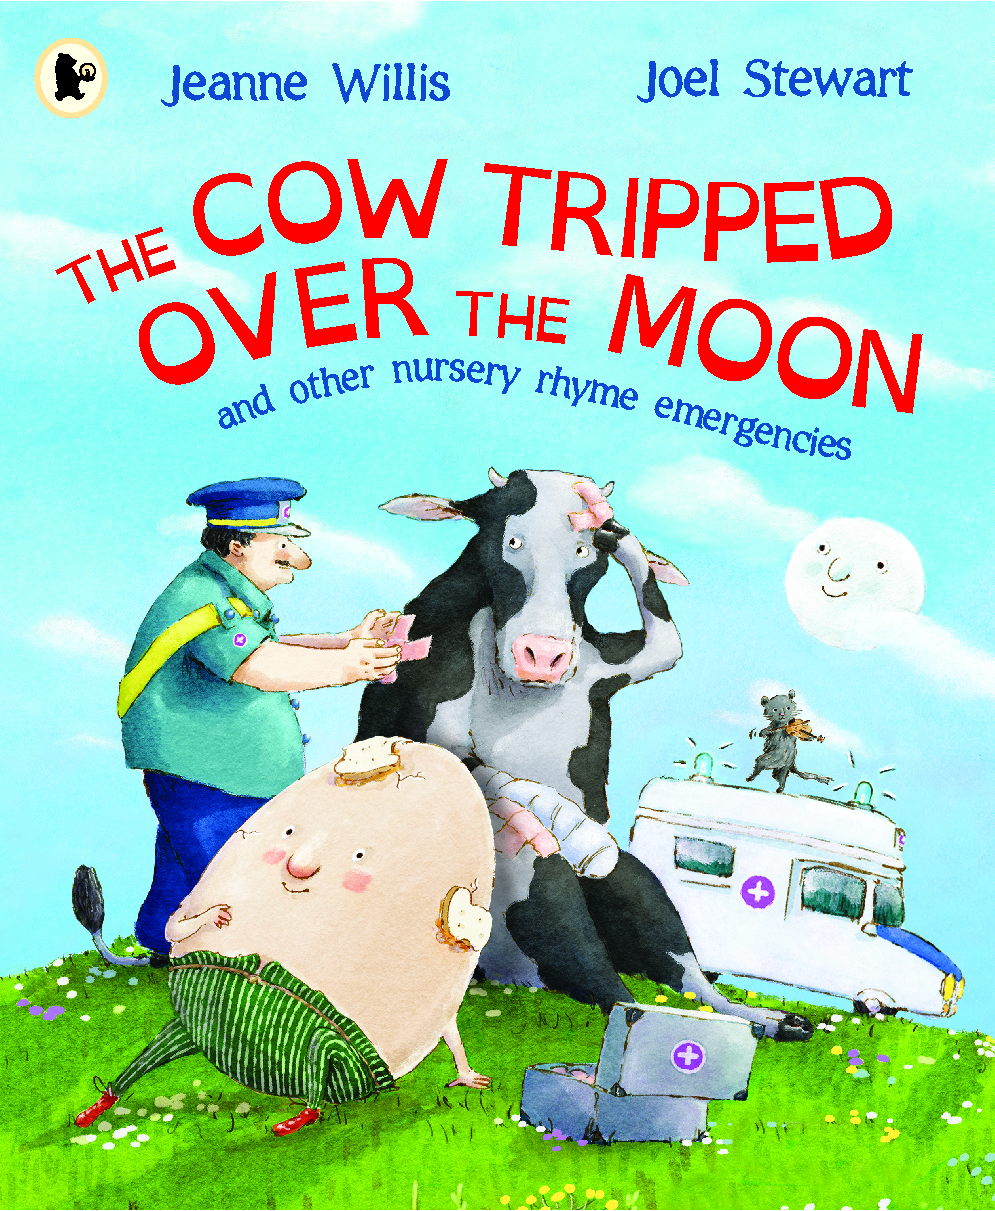 The-Cow-Tripped-Over-the-Moon-and-Other-Nursery-Rhyme-Emergencies